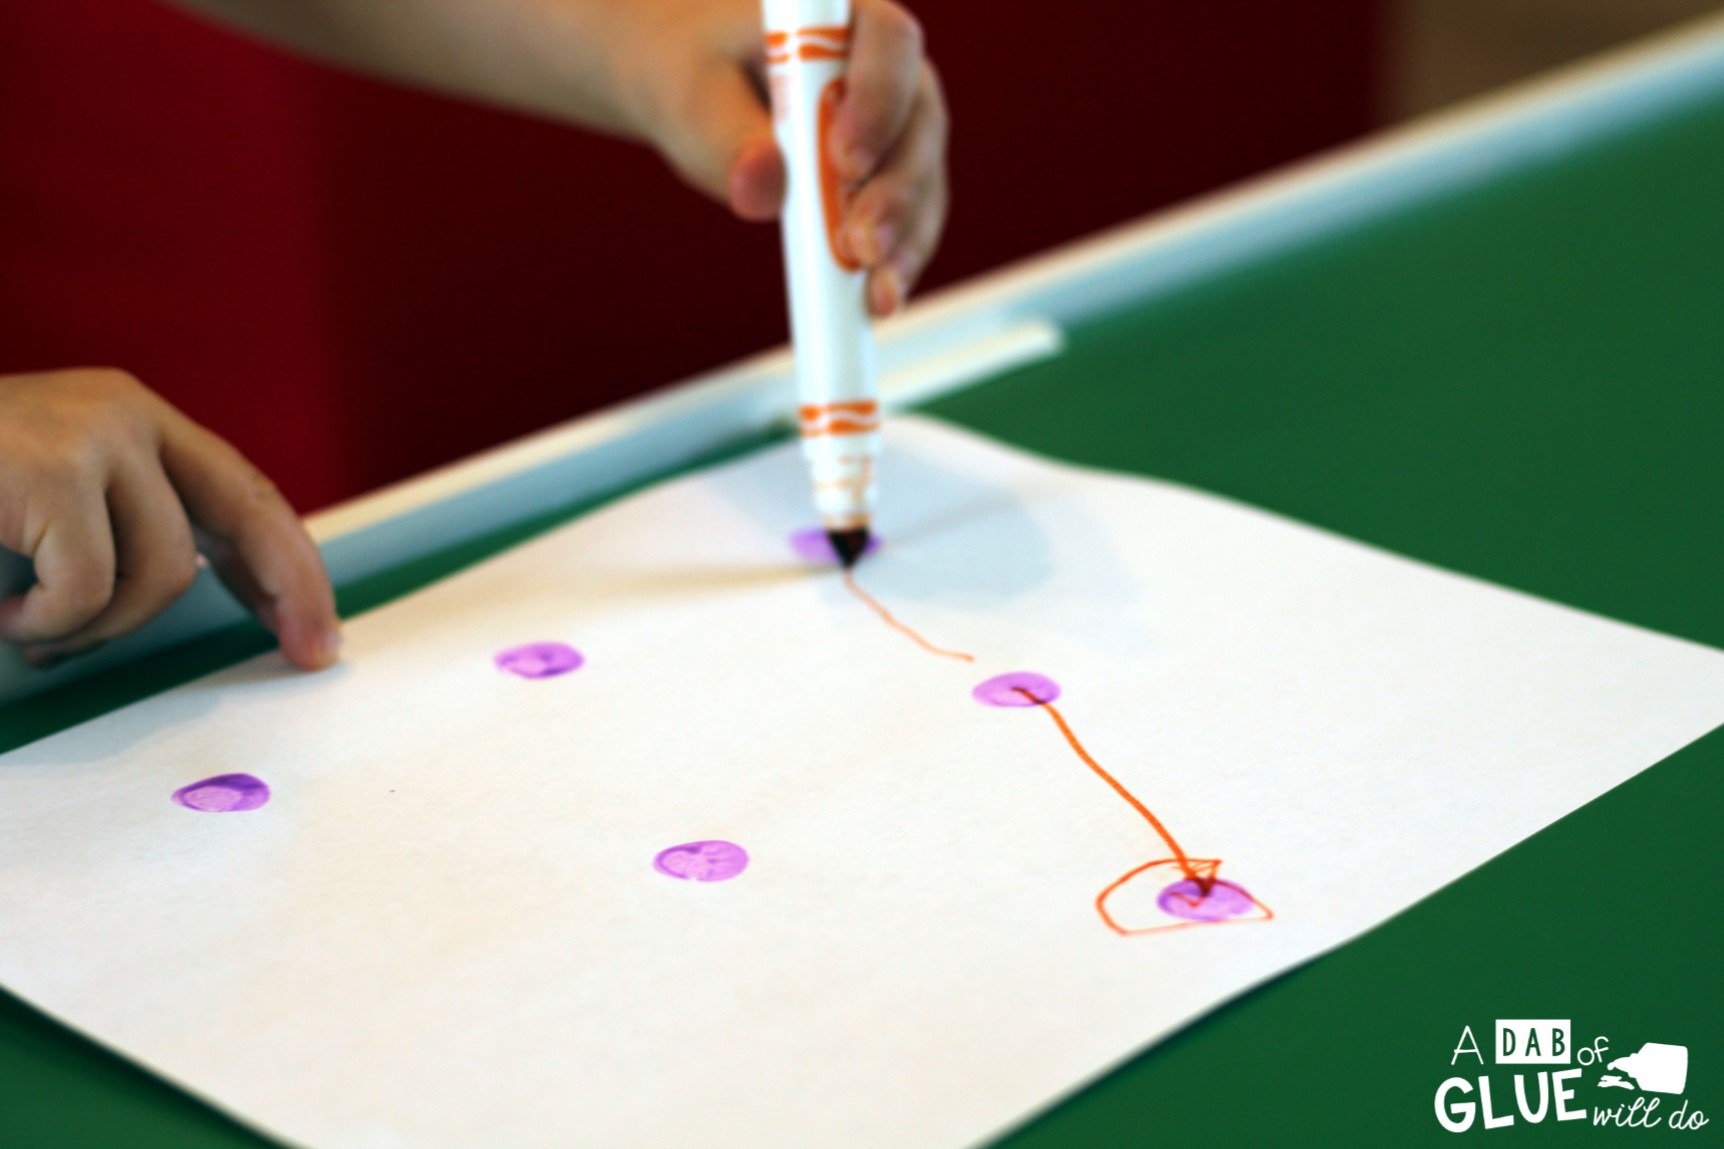 Dot to Dot Shapes is a fun hands-on activity that your students or children will very much enjoy.